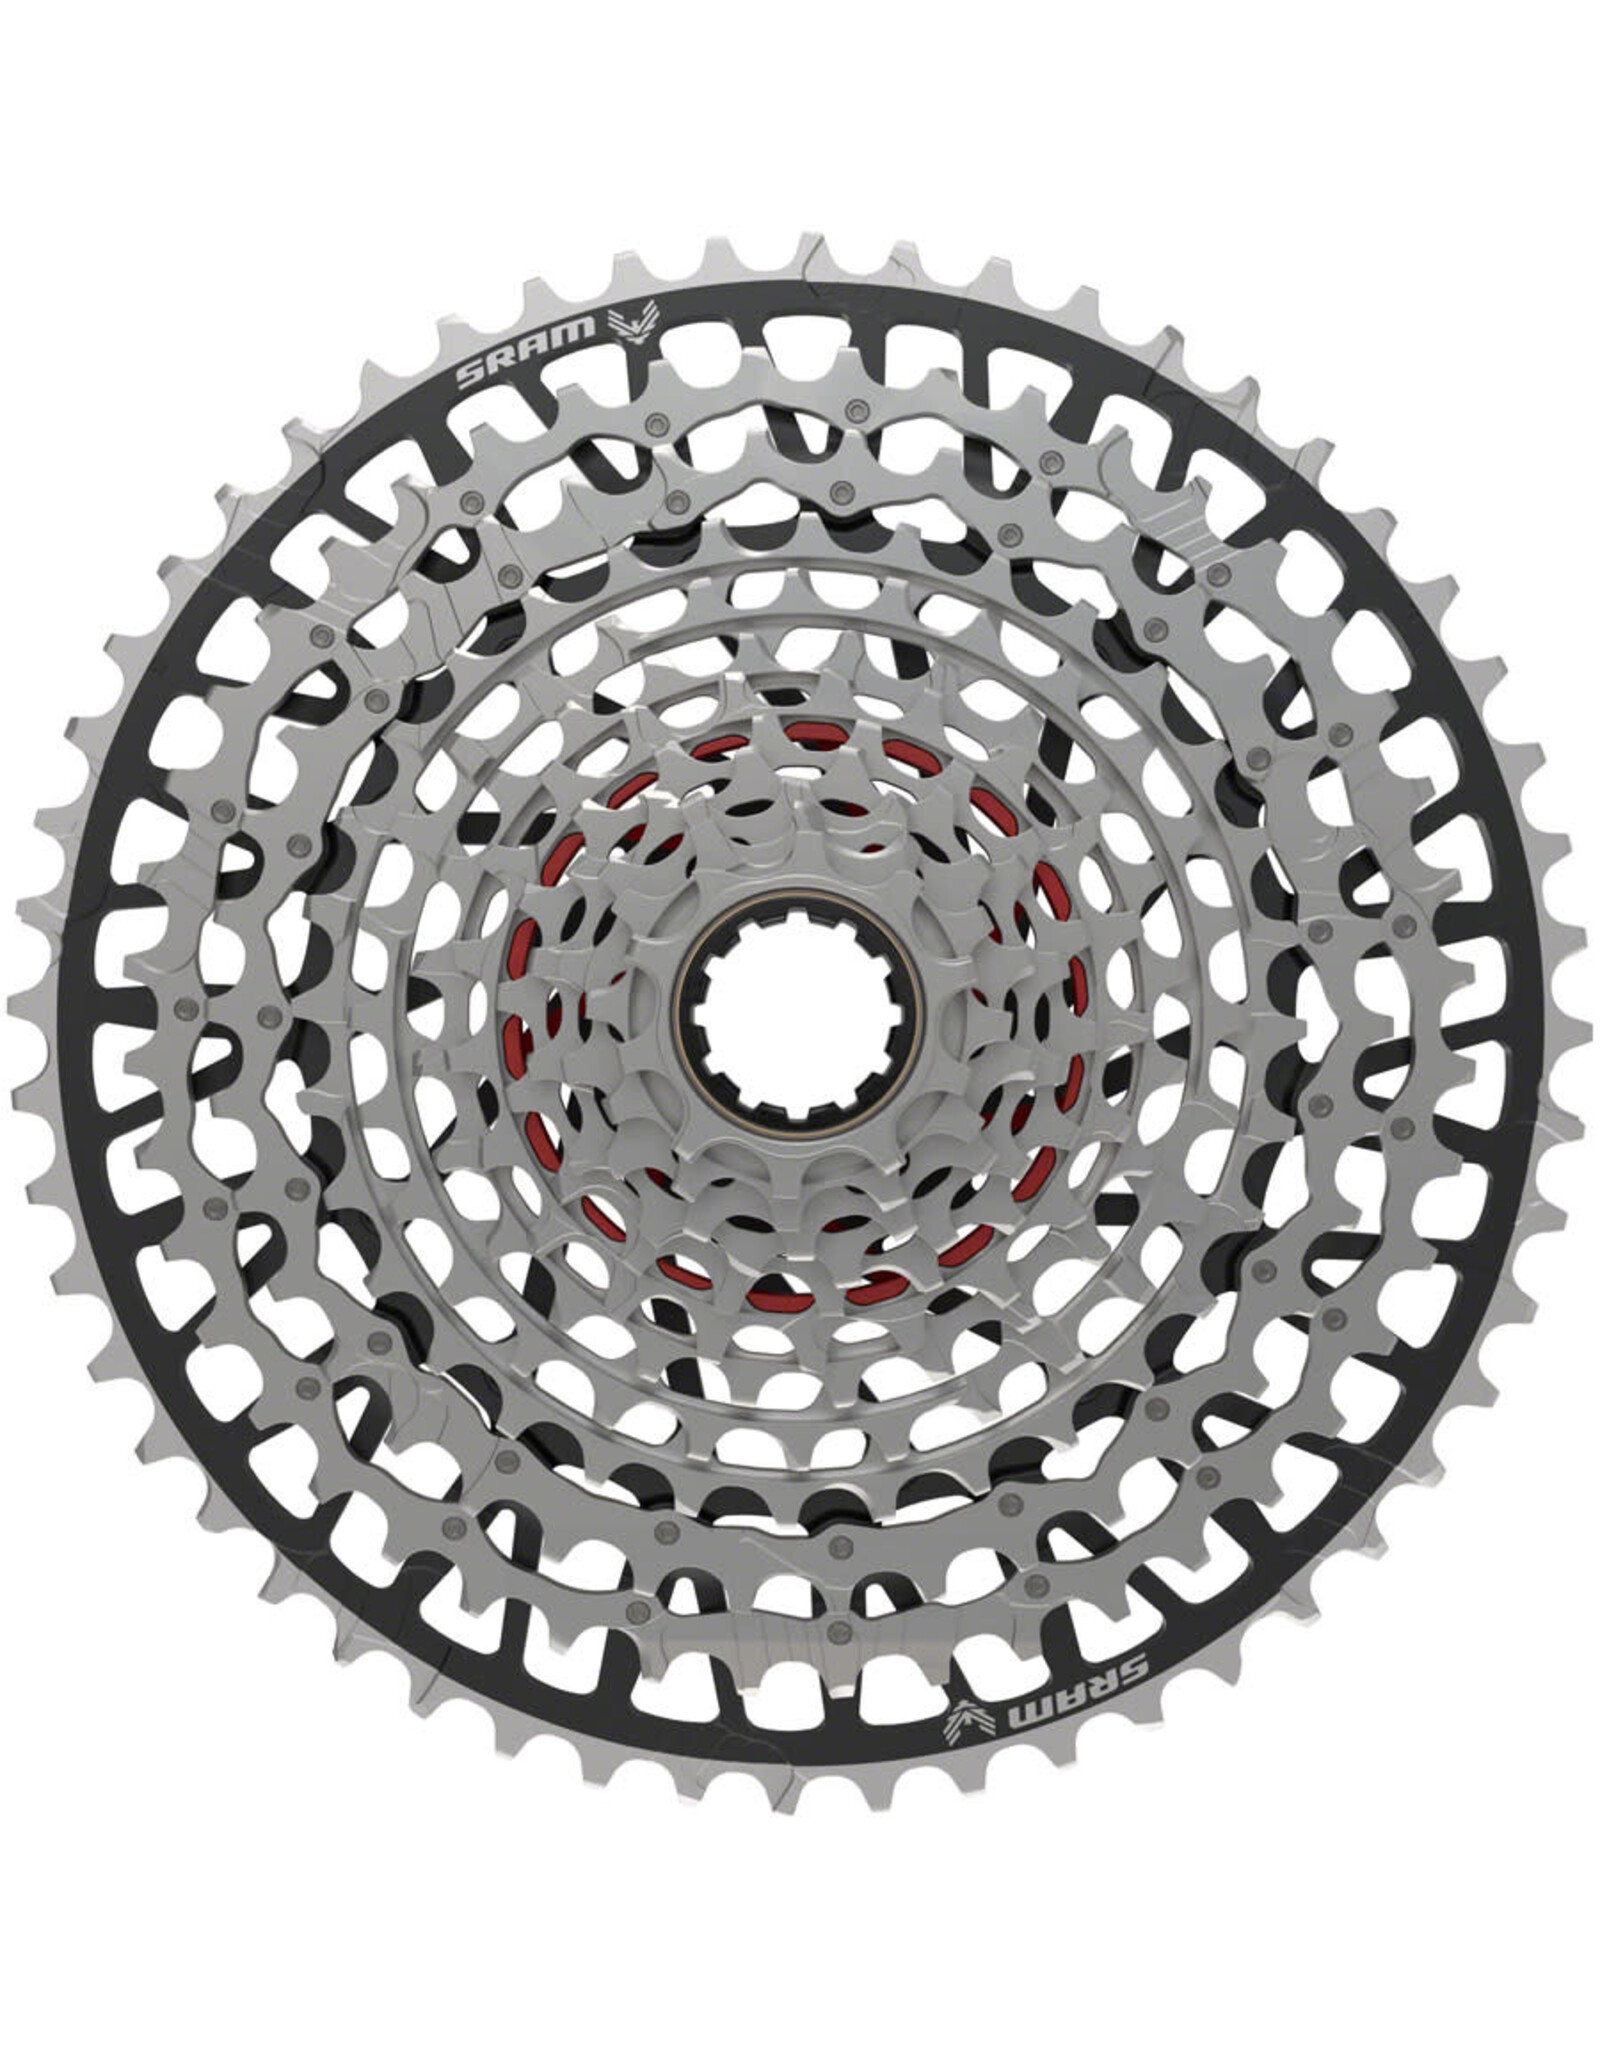 SRAM SRAM XX Eagle T-Type XS-1297 Cassette - 12-Speed, 10-52t, For XD Driver, Silver/Black